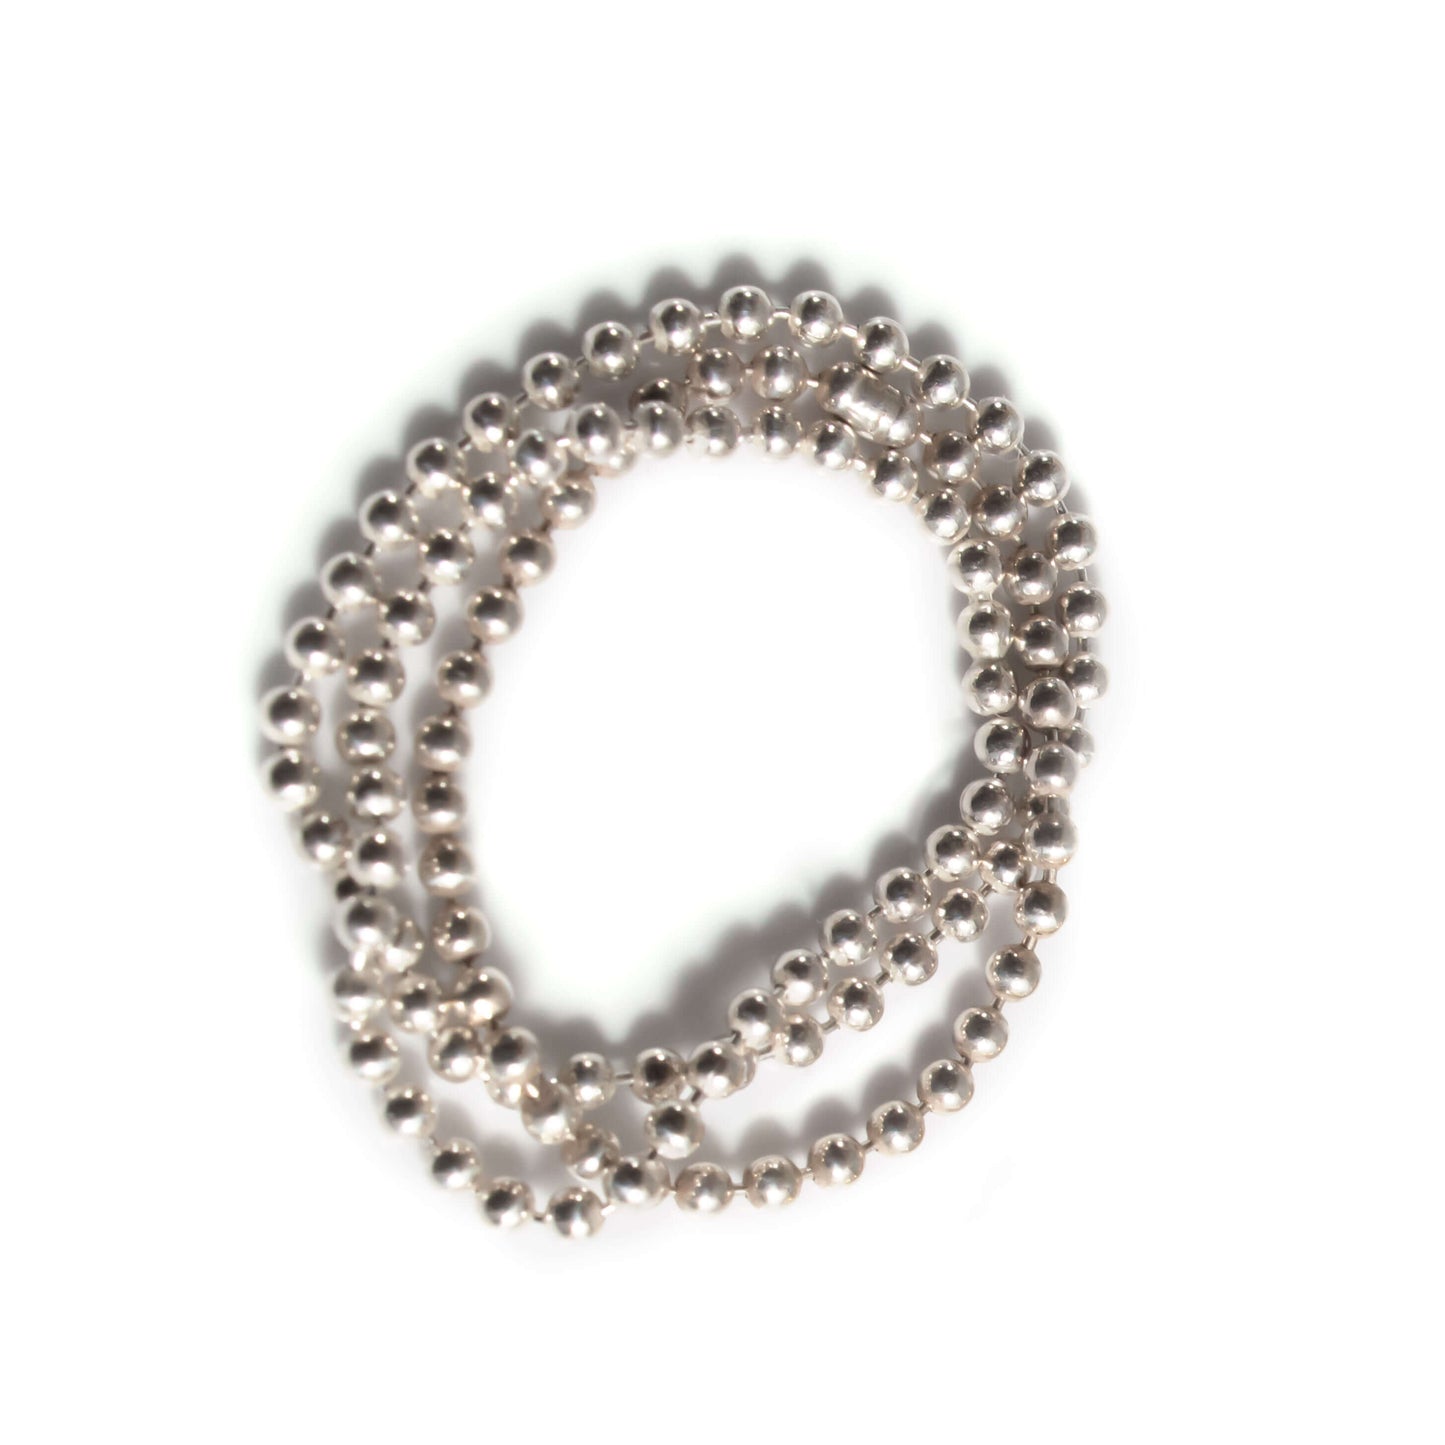 Silver925 Stacking Ball Chain Ring | LASSO